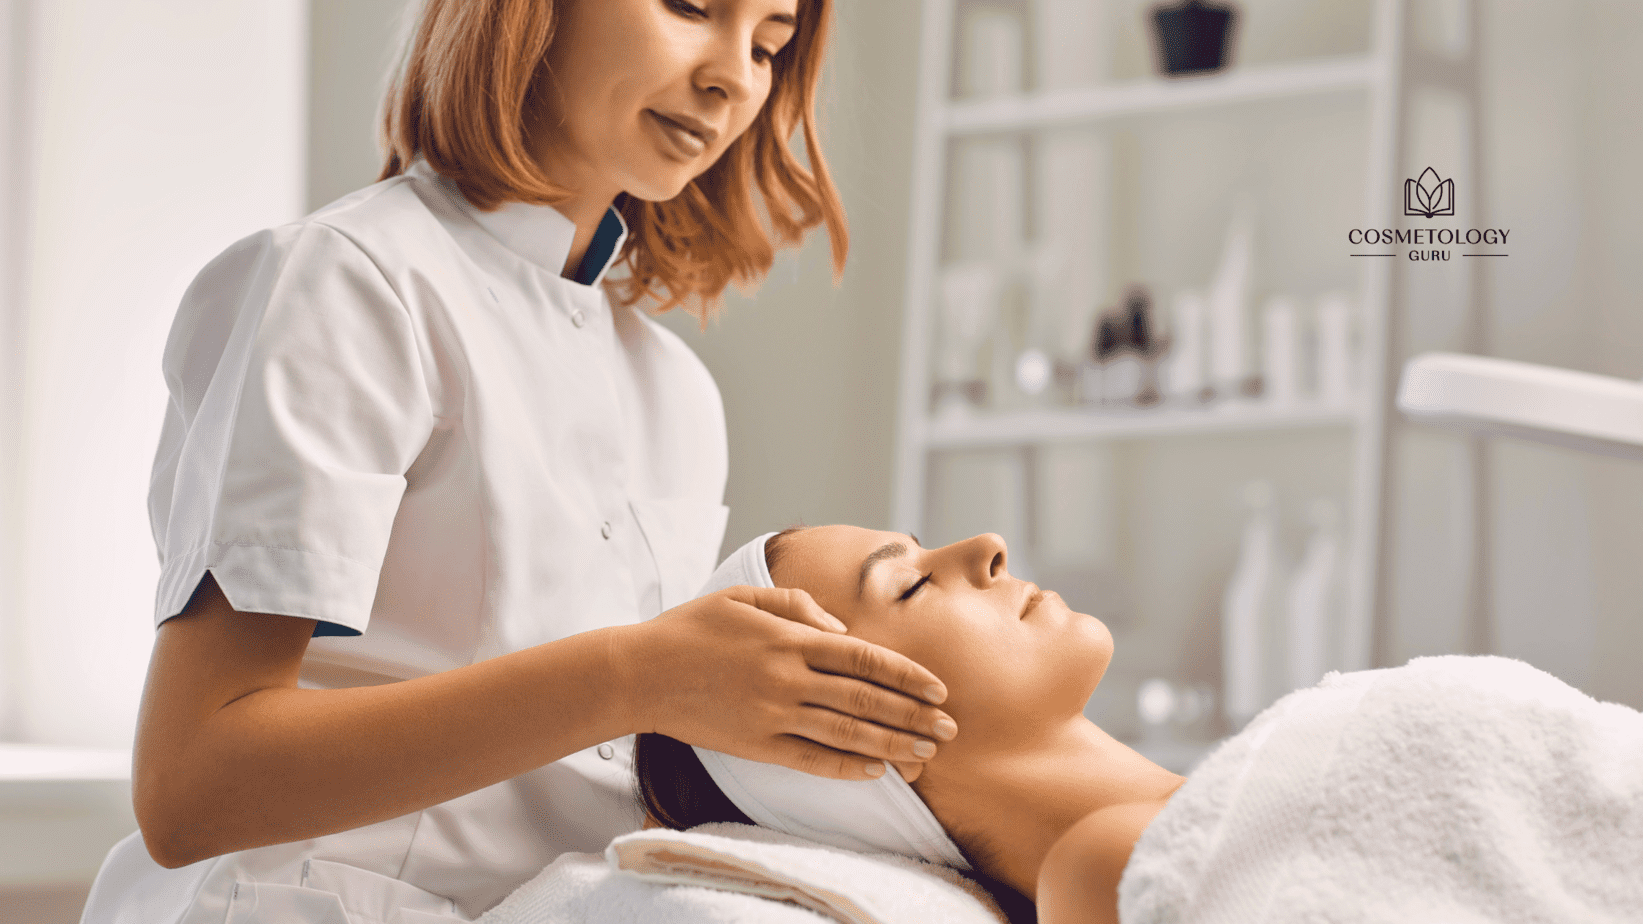 The 7 Highest-Paying Beautician Jobs in 2022